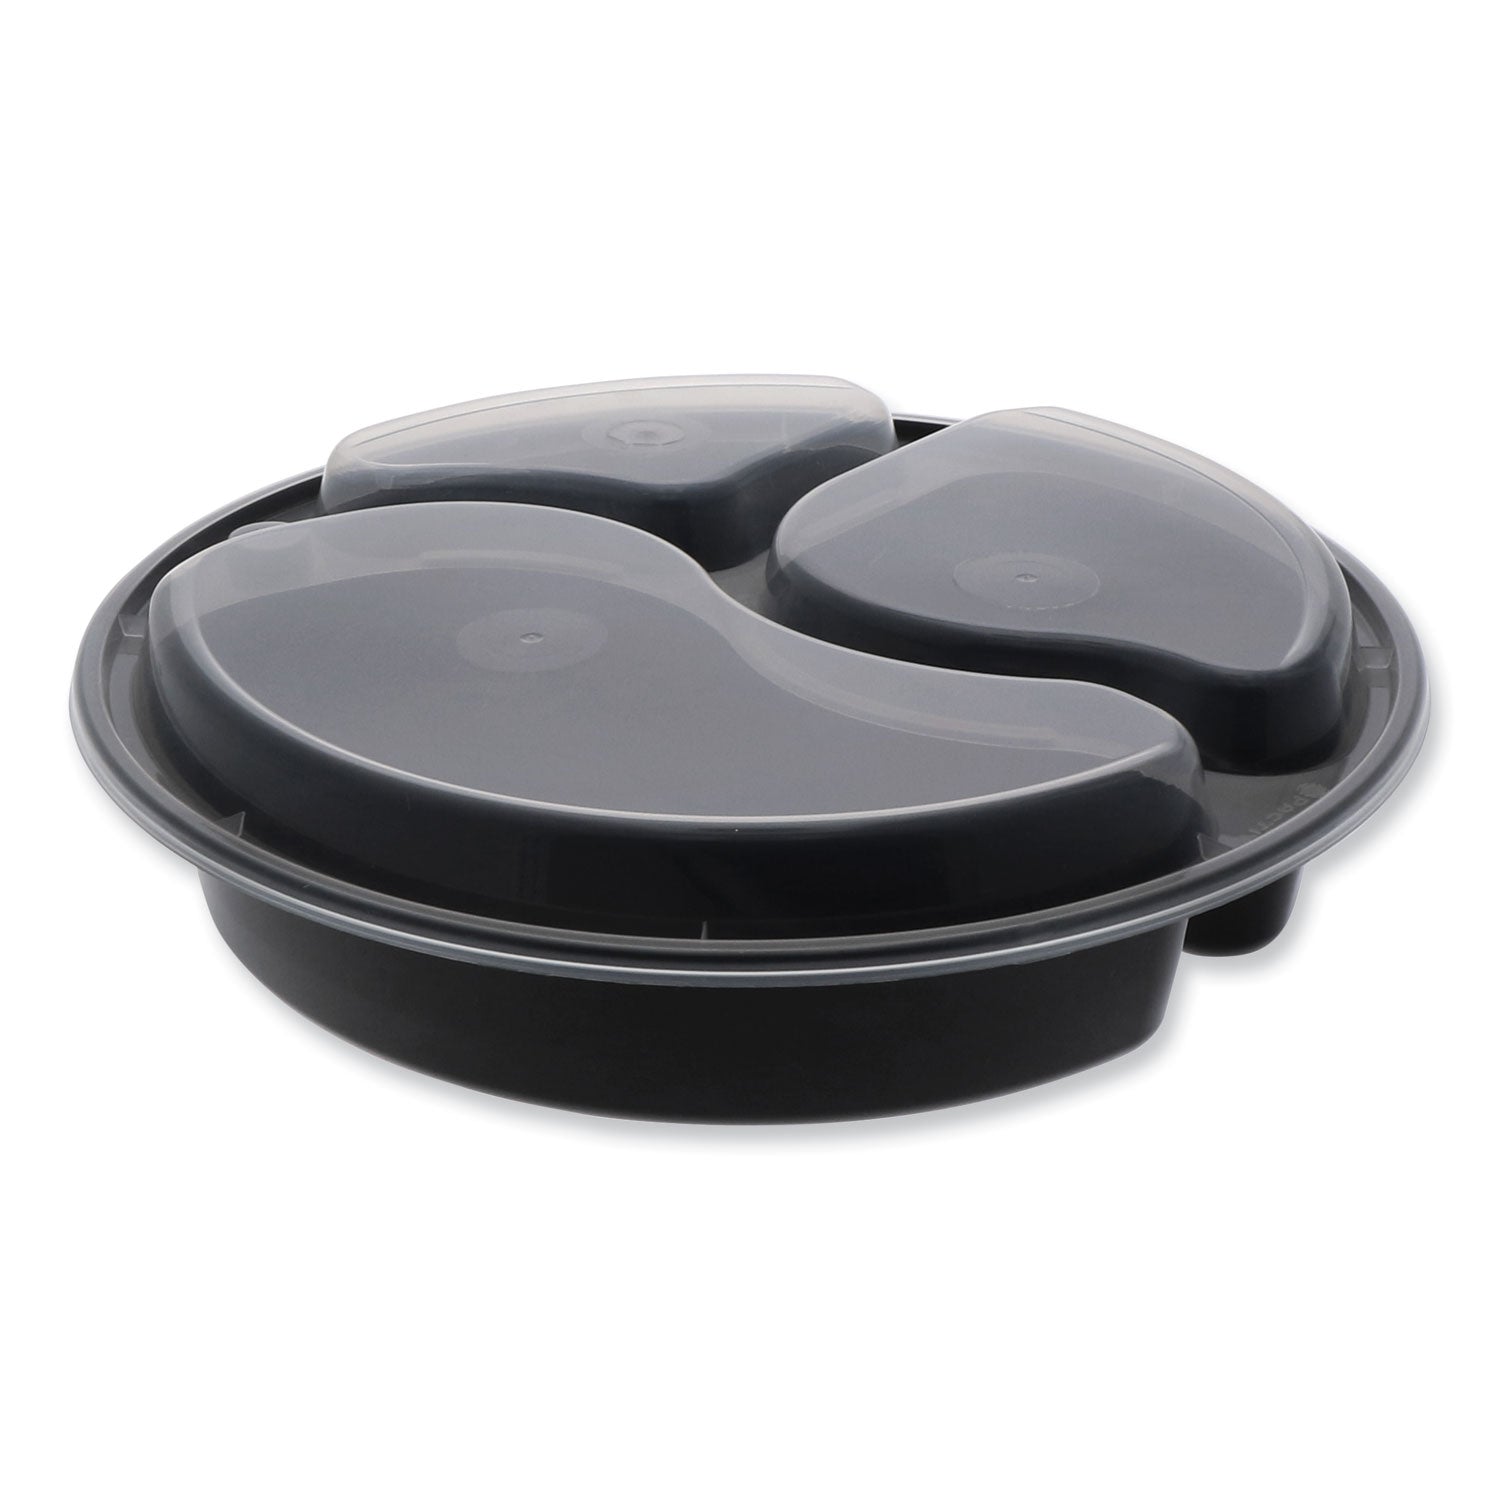 newspring-versatainer-microwavable-containers-round-3-compartment-39-oz-9-x-9-x-225-black-clear-plastic-150-carton_pctnc9388b - 1